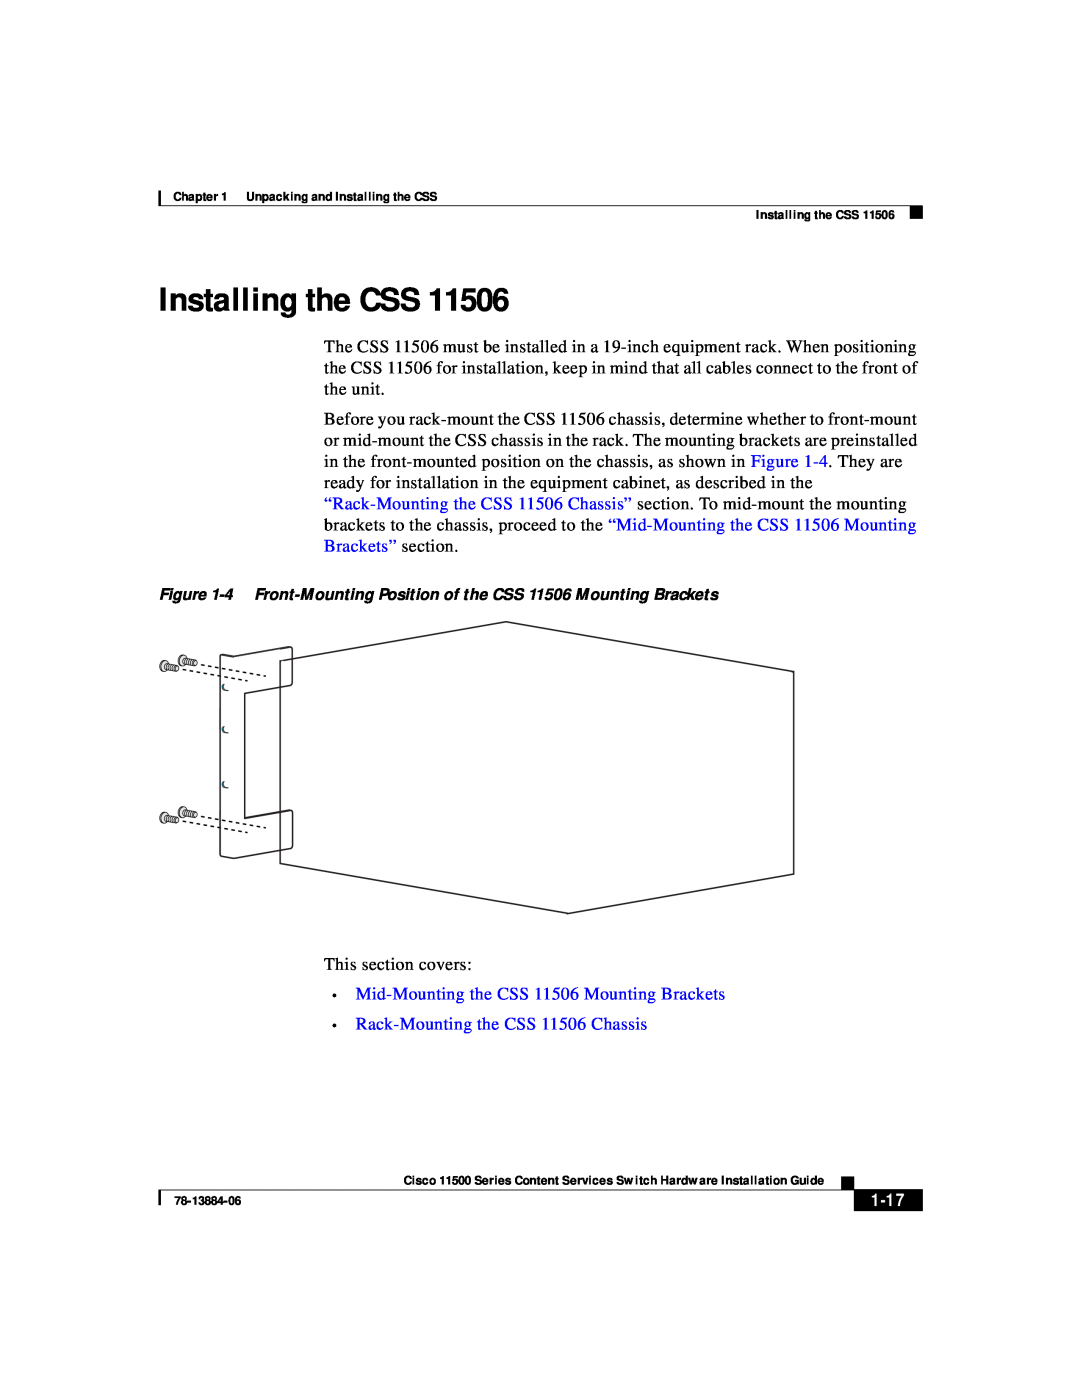 Cisco Systems 11500 Series manual Installing the CSS, Mid-Mounting the CSS 11506 Mounting Brackets, 1-17 